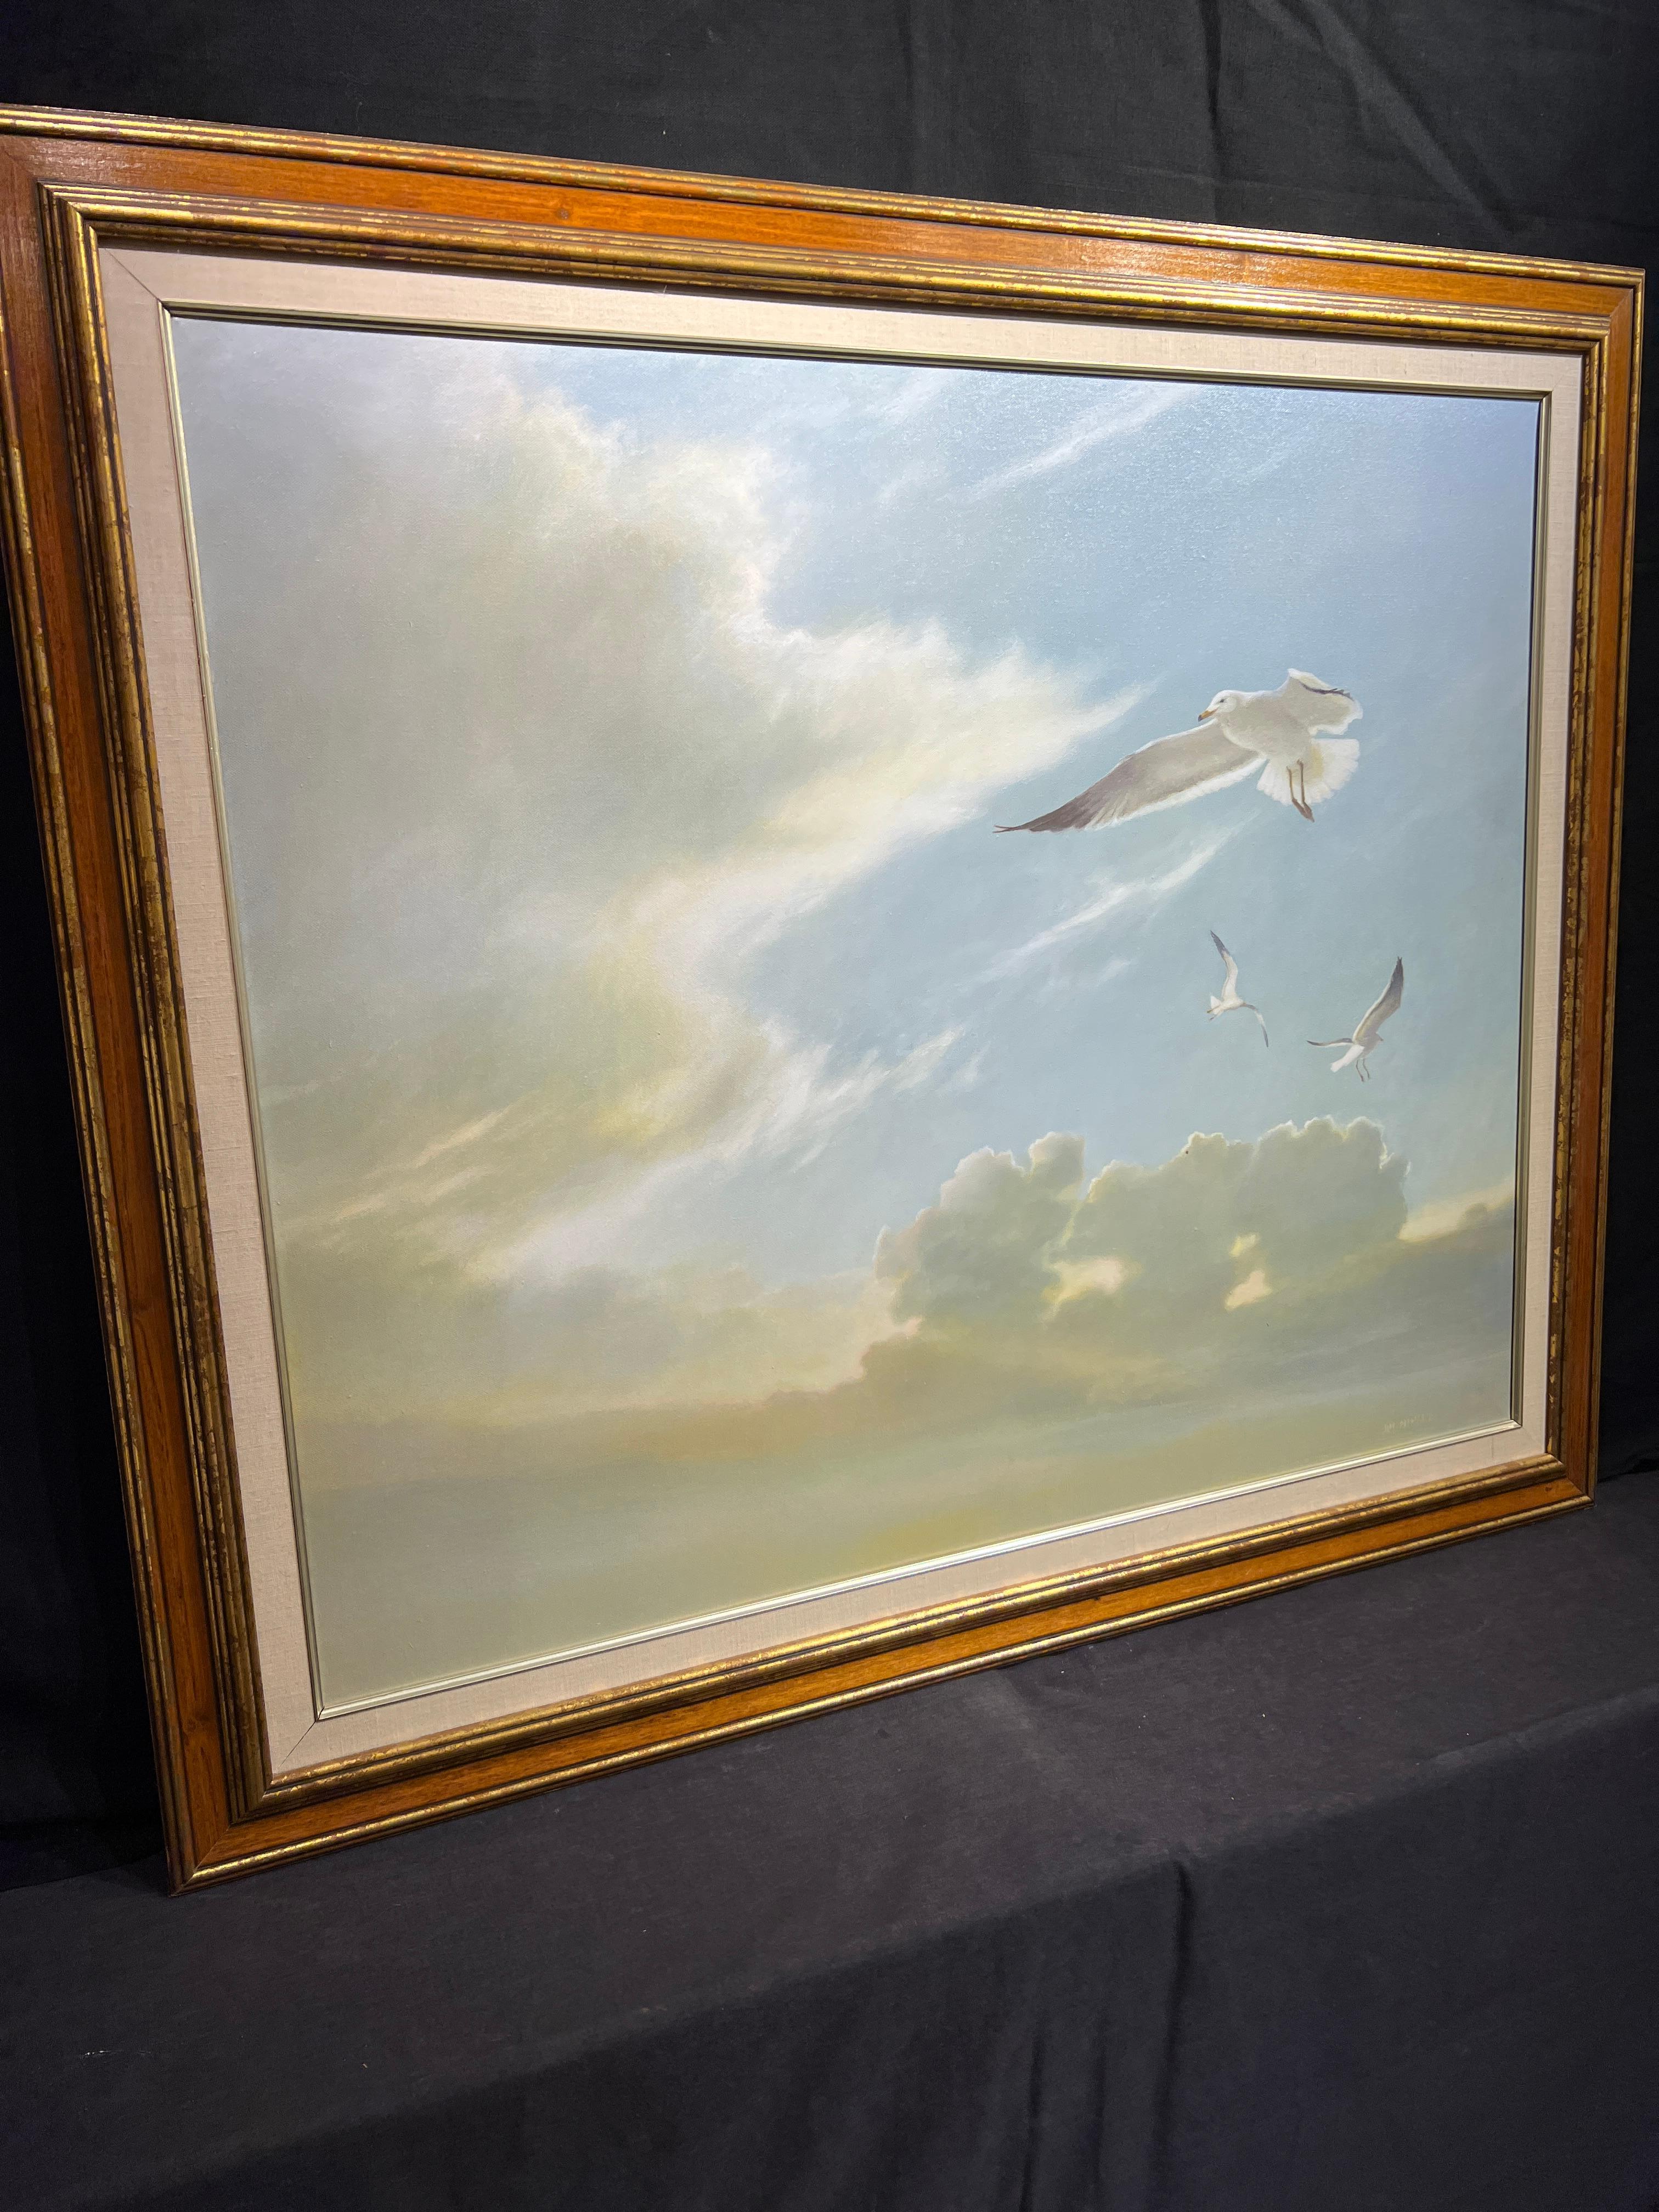 Seagulls (Birds in Flight), 1982
By. Jim Palmer (American, b. 1941)
Signed and Dated Lower Right
Unframed: 32